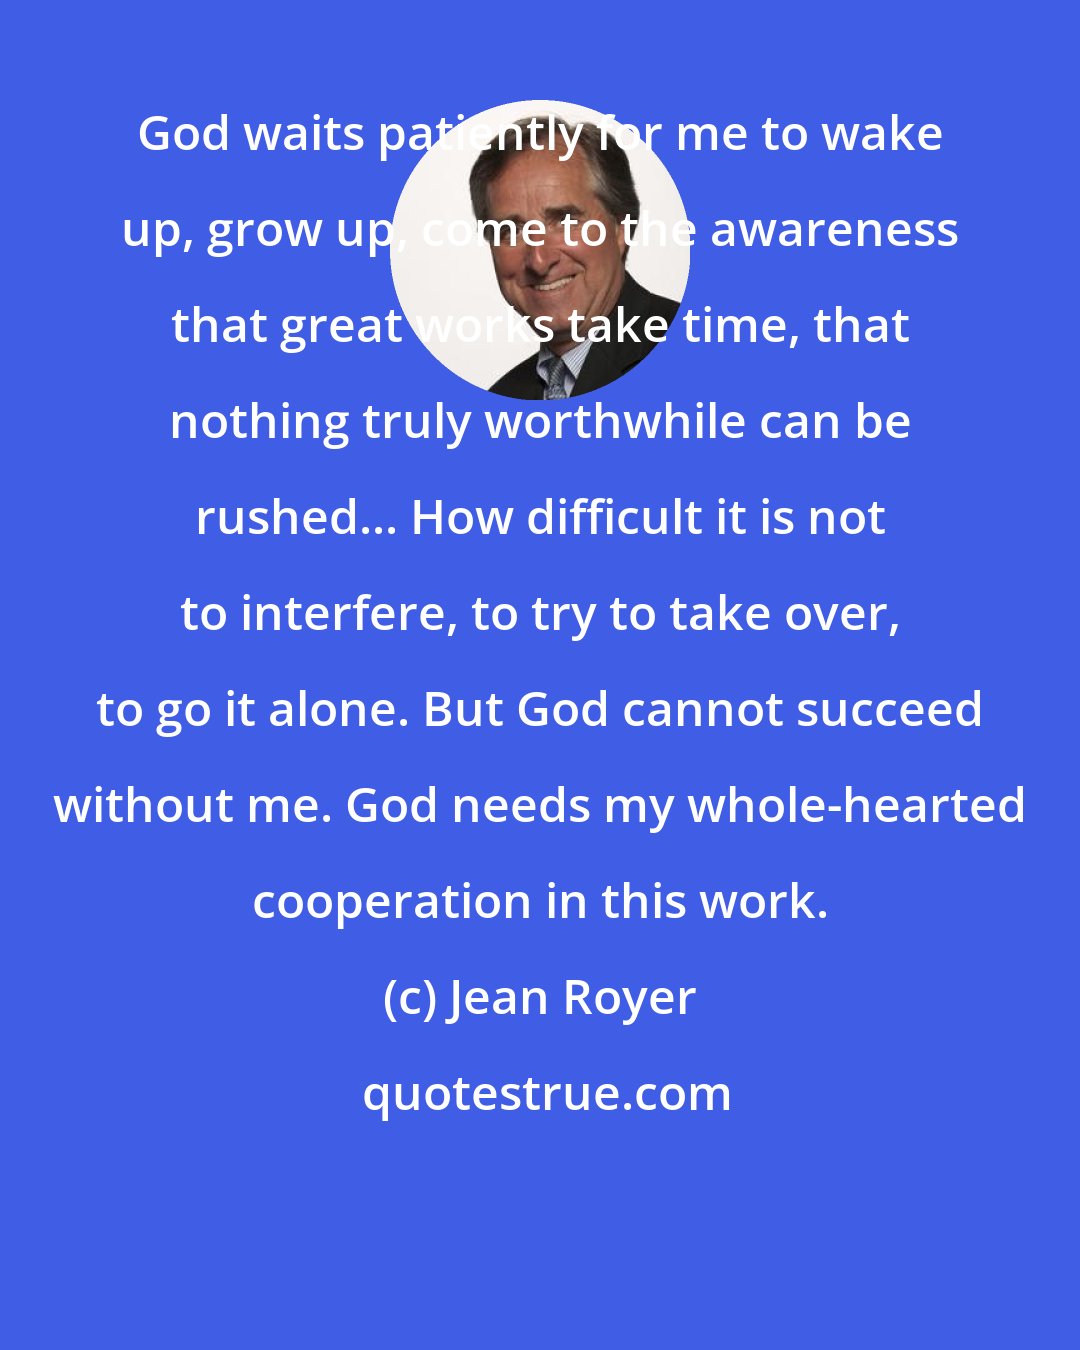 Jean Royer: God waits patiently for me to wake up, grow up, come to the awareness that great works take time, that nothing truly worthwhile can be rushed... How difficult it is not to interfere, to try to take over, to go it alone. But God cannot succeed without me. God needs my whole-hearted cooperation in this work.